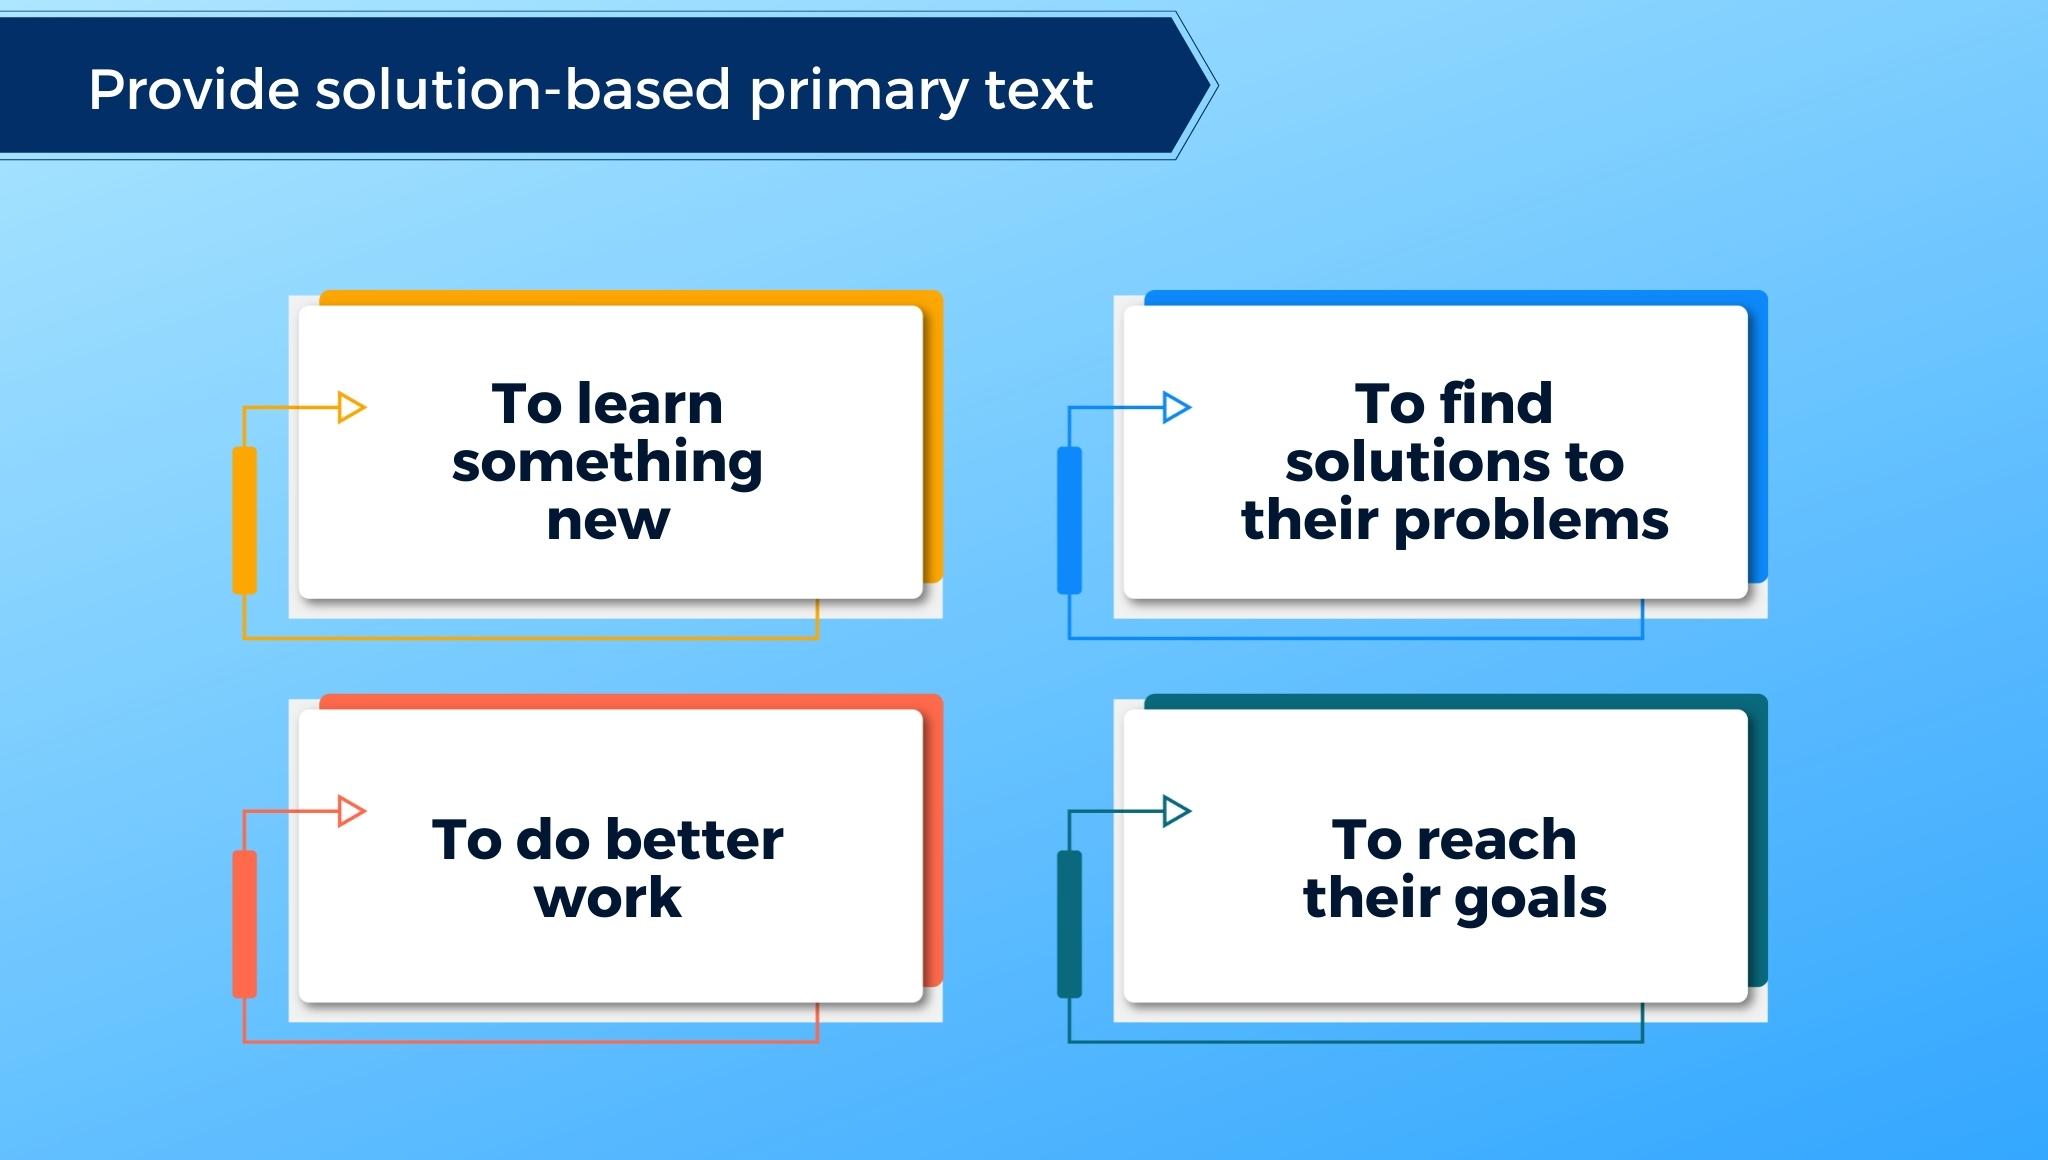 Provide solution-based primary text